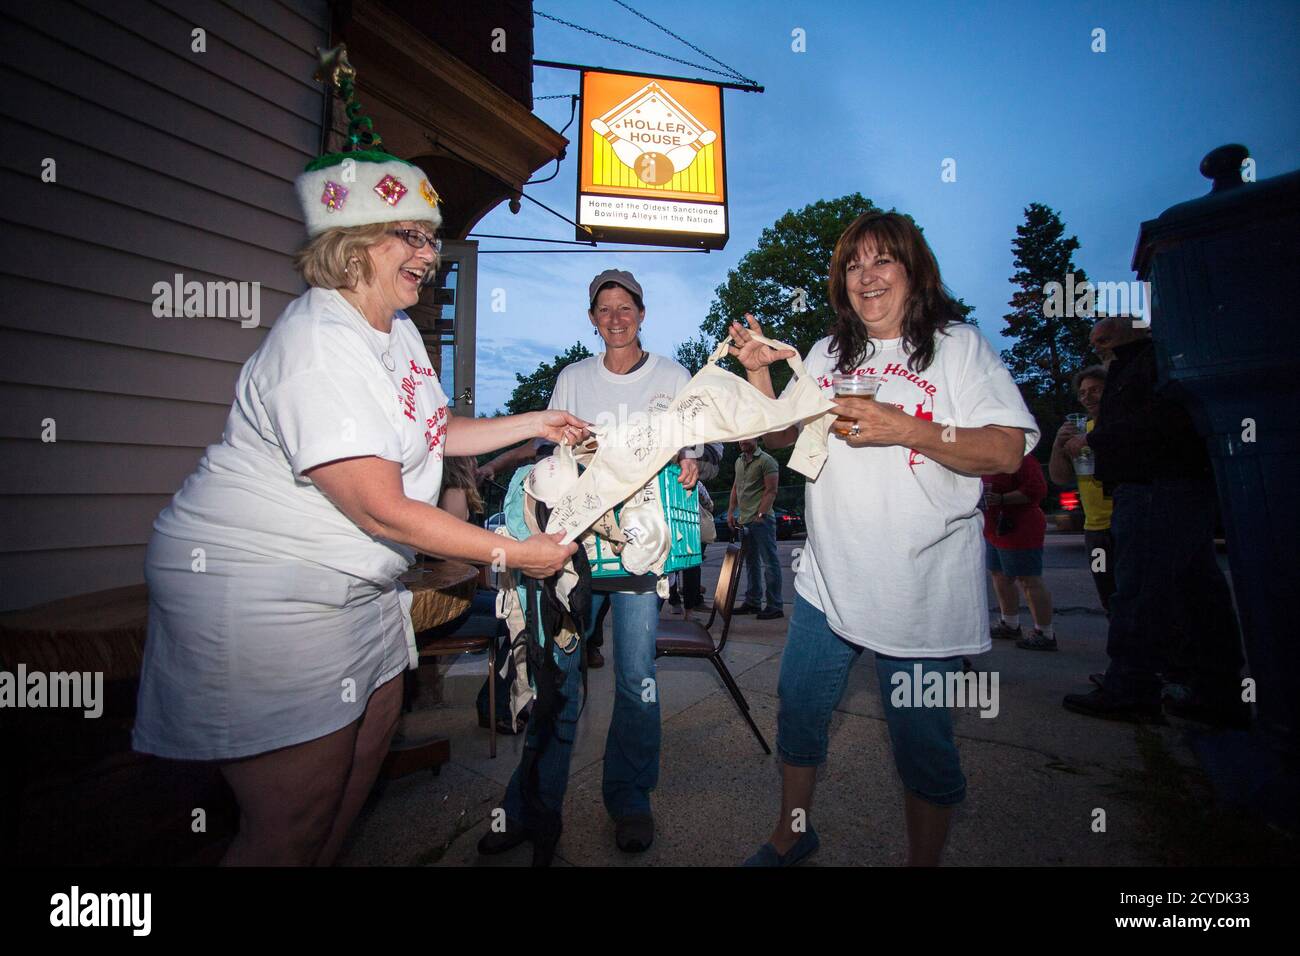 Patrons of the Holler House bar participate in the Great Bra Rehanging  event in Milwaukee, Wisconsin June 14, 2013. A Milwaukee city inspector had  in April ordered Holler House's owner Marcy Skowronski